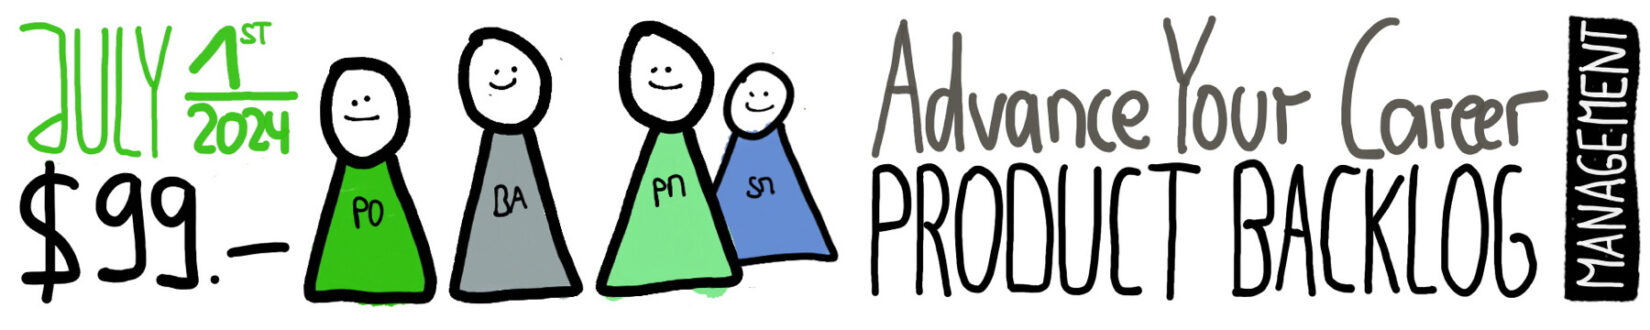 Join the Advanced Product Backlog Management Course by Stefan Wolpers — Berlin-Product-People.com